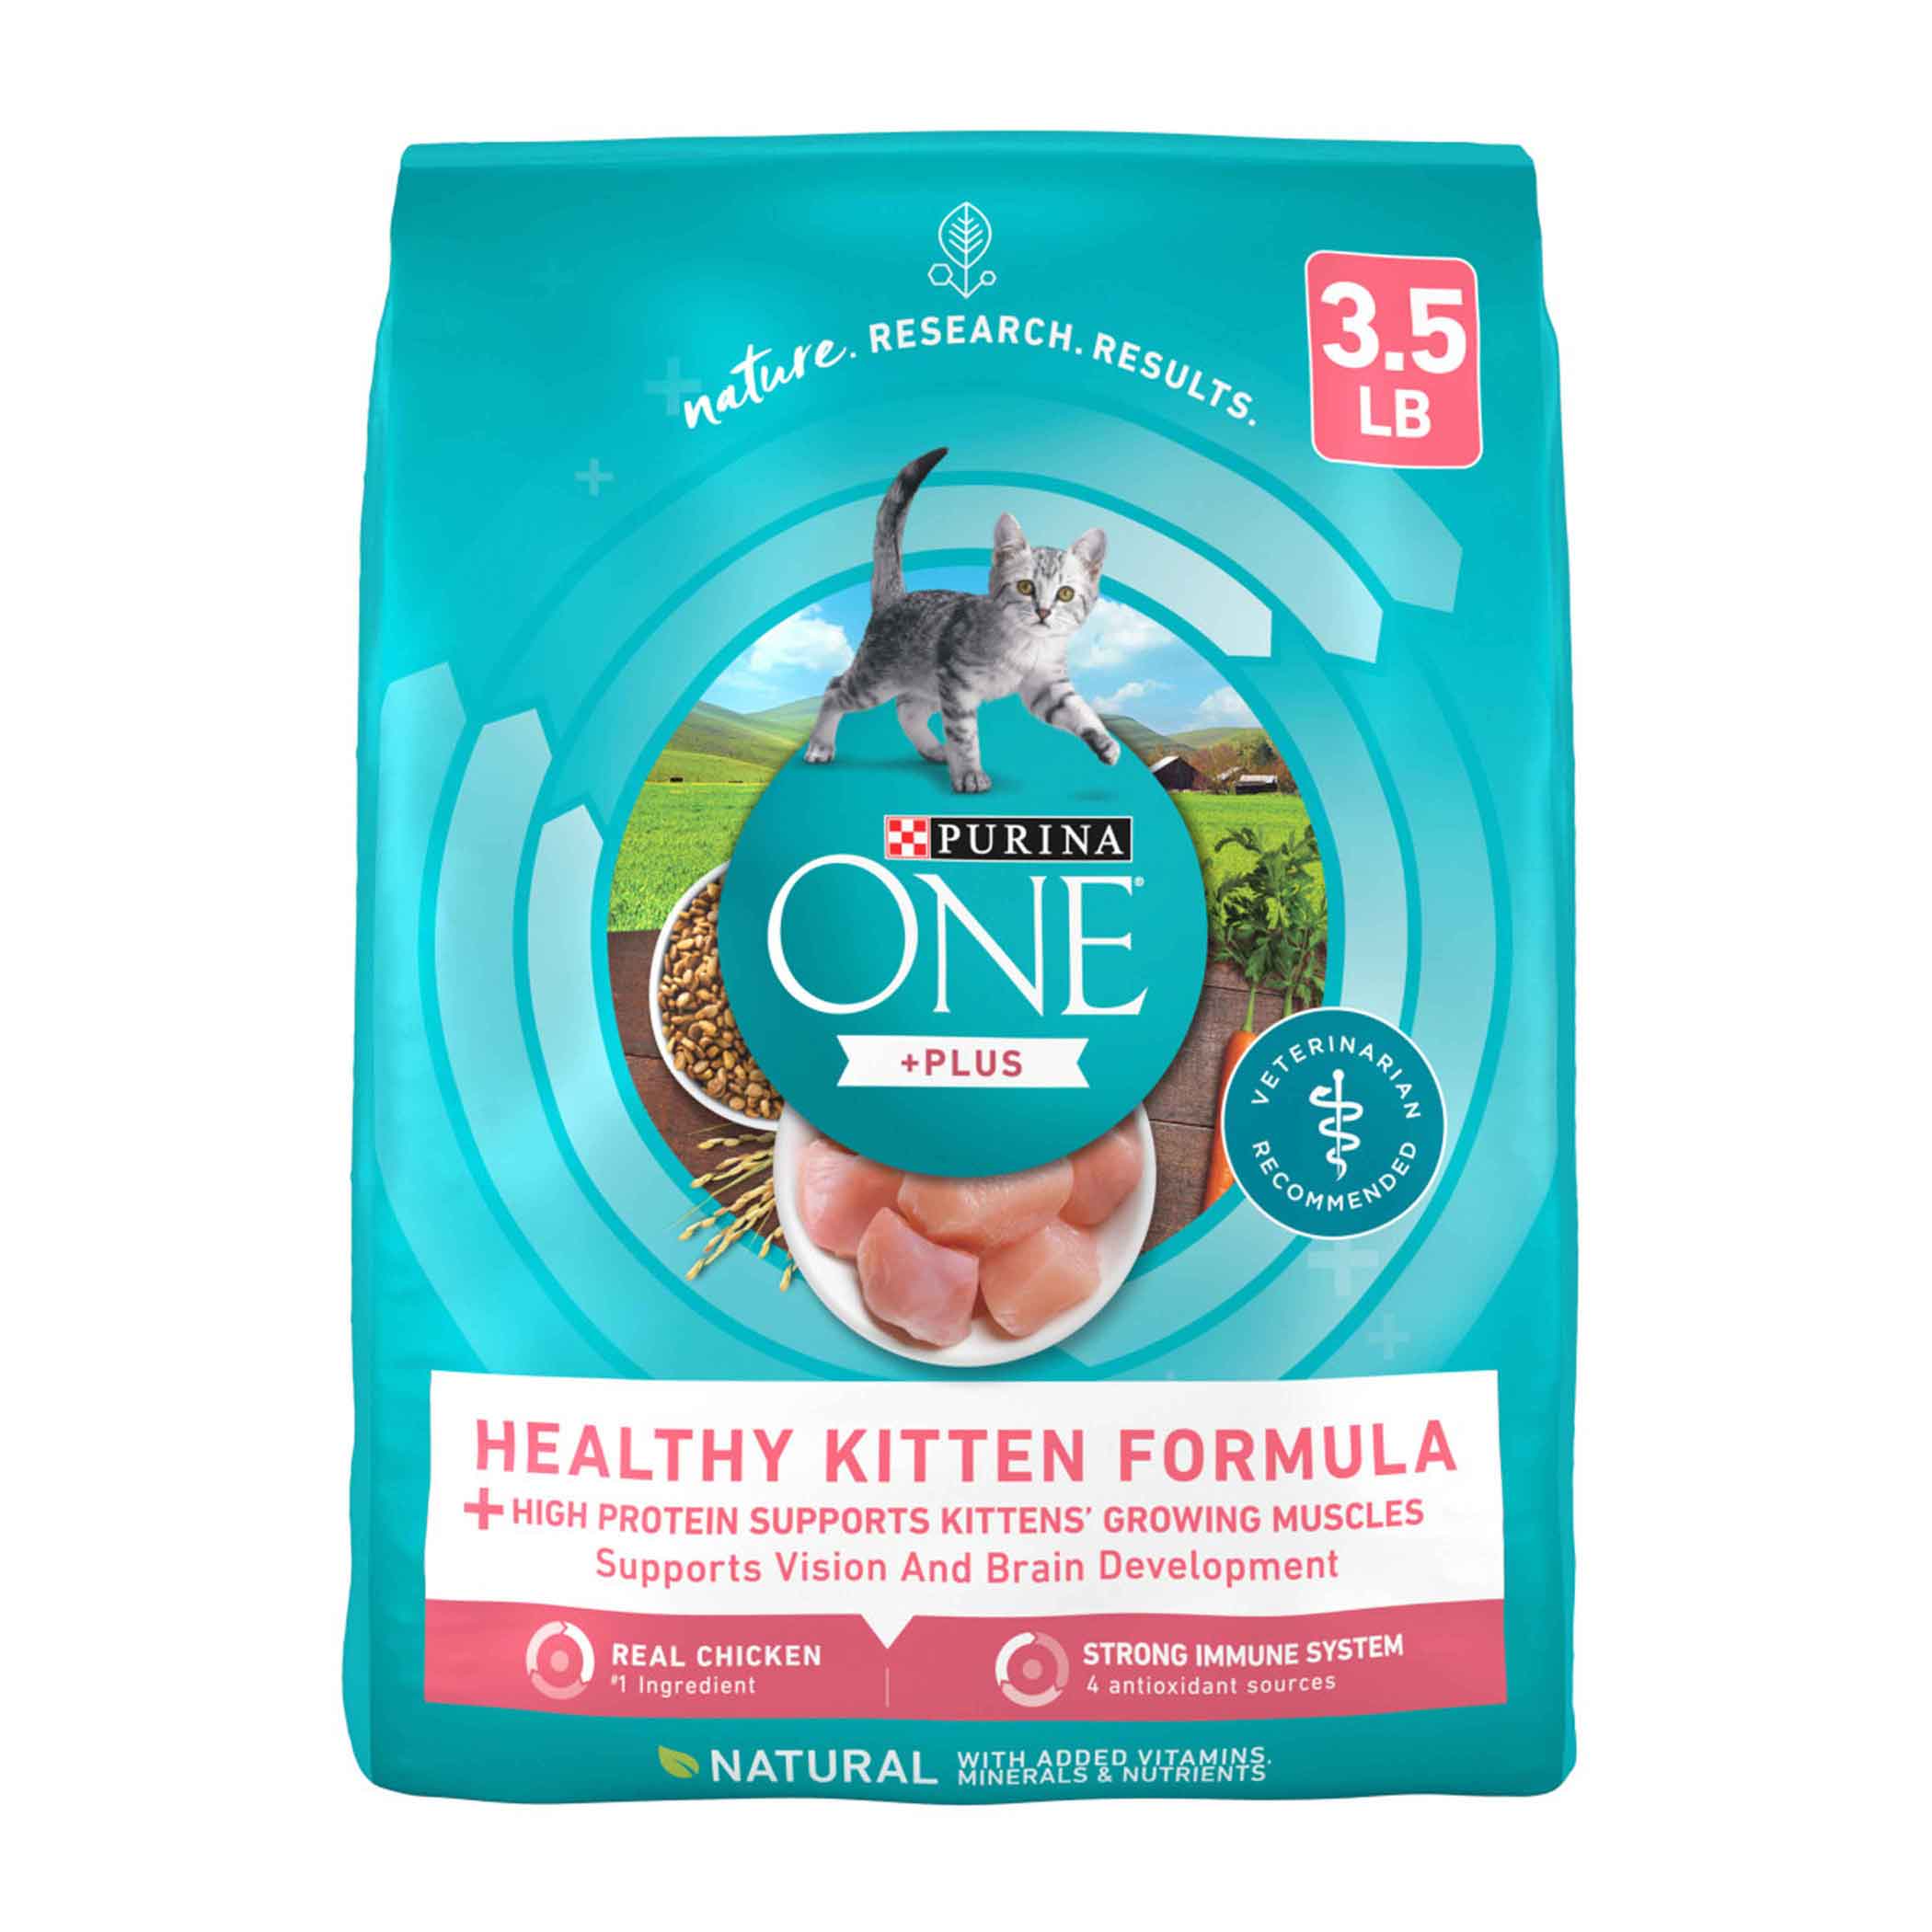 Purina ONE High Protein, Natural Dry Kitten Food, +Plus Healthy Kitten Formula - 3.5 Pound Bag